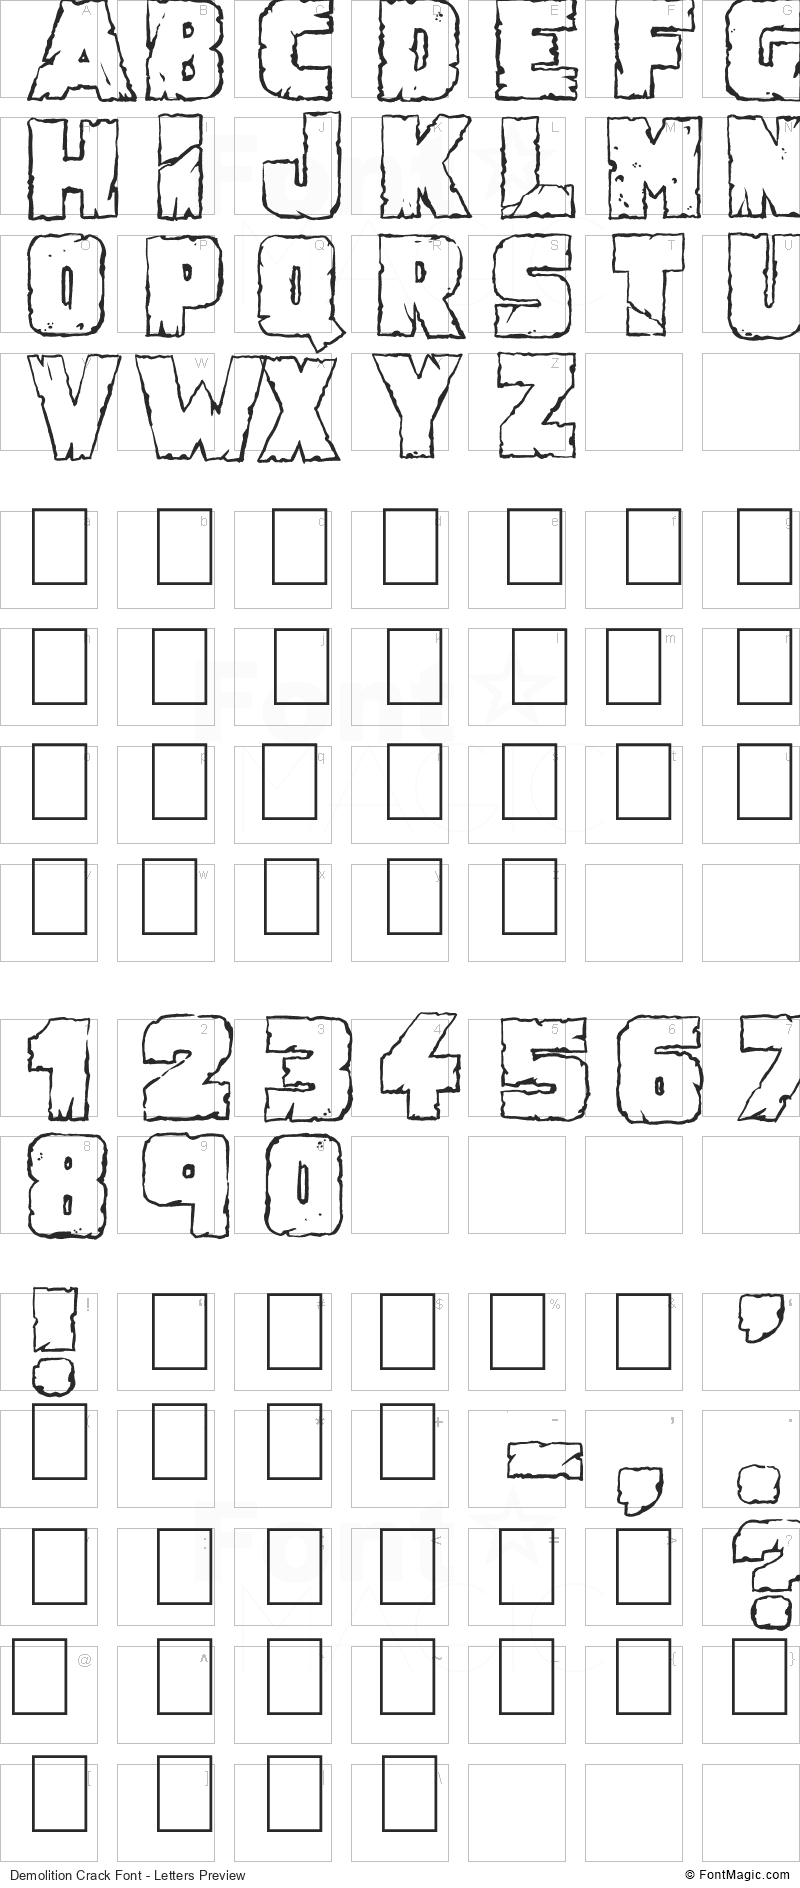 Demolition Crack Font - All Latters Preview Chart